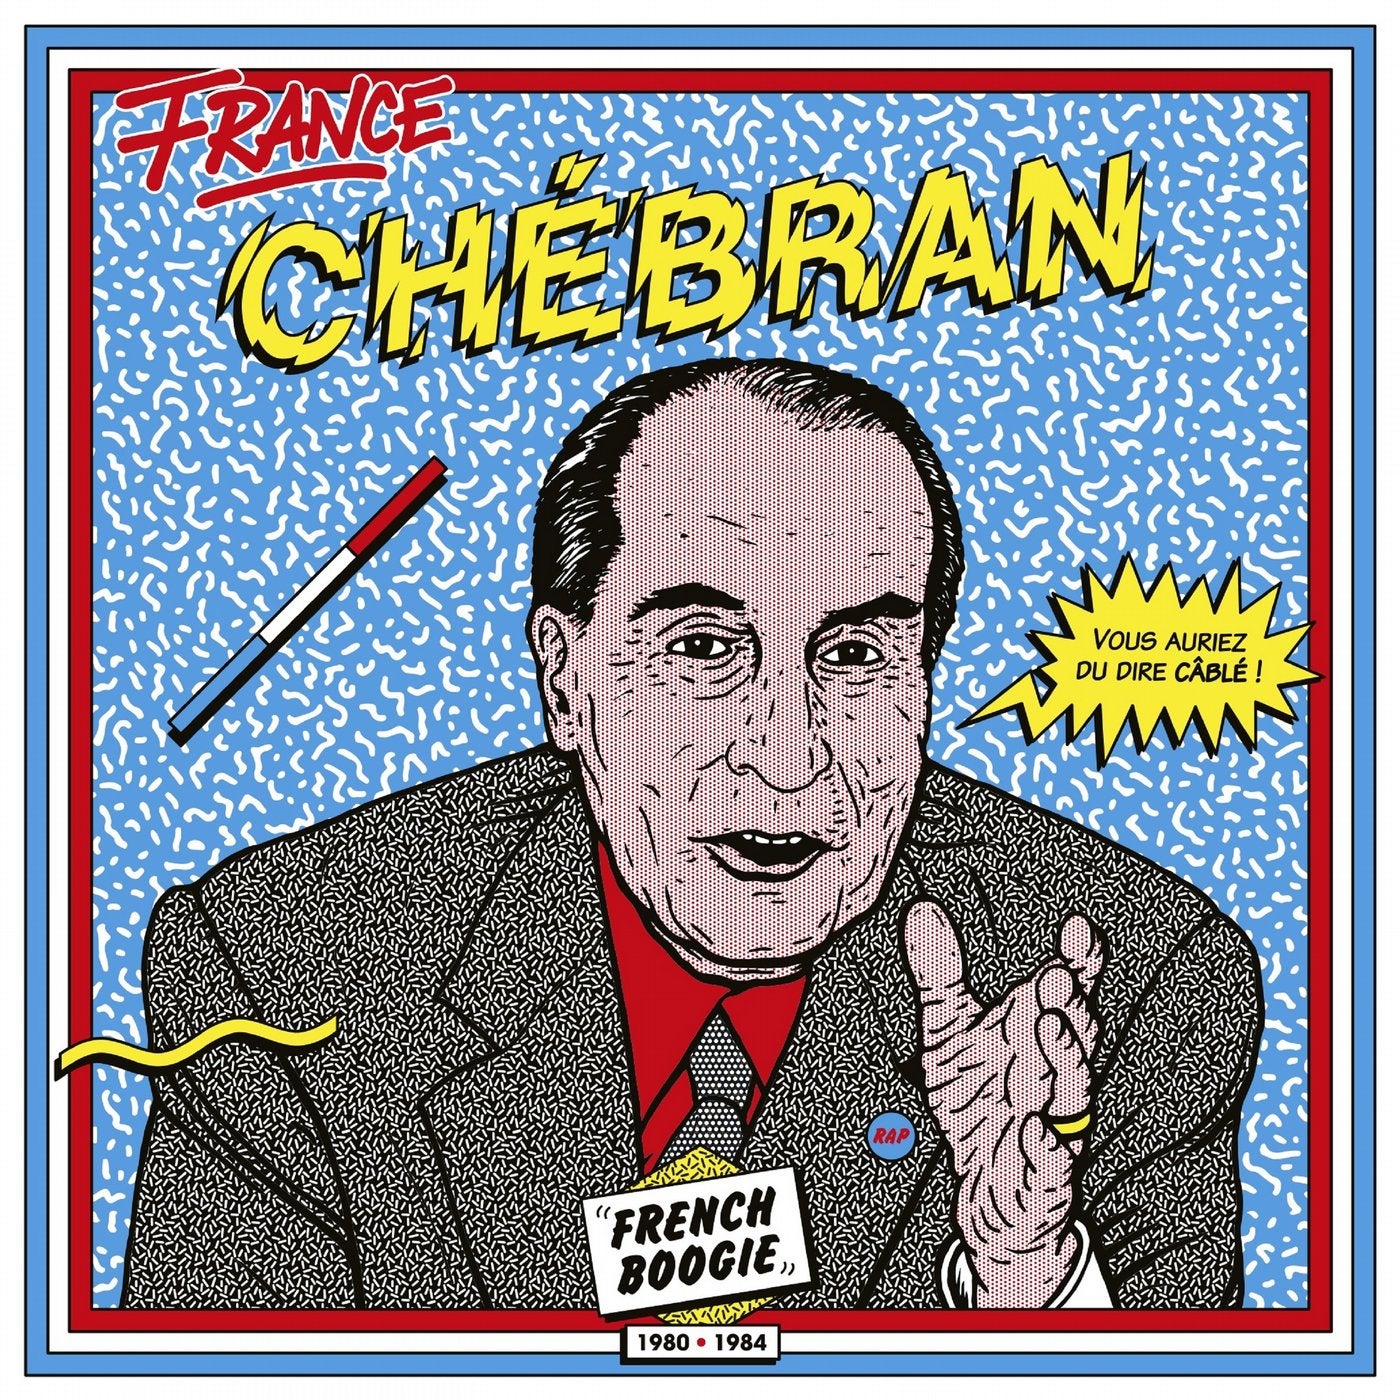 France chebran: French Boogie (1980 - 1985)